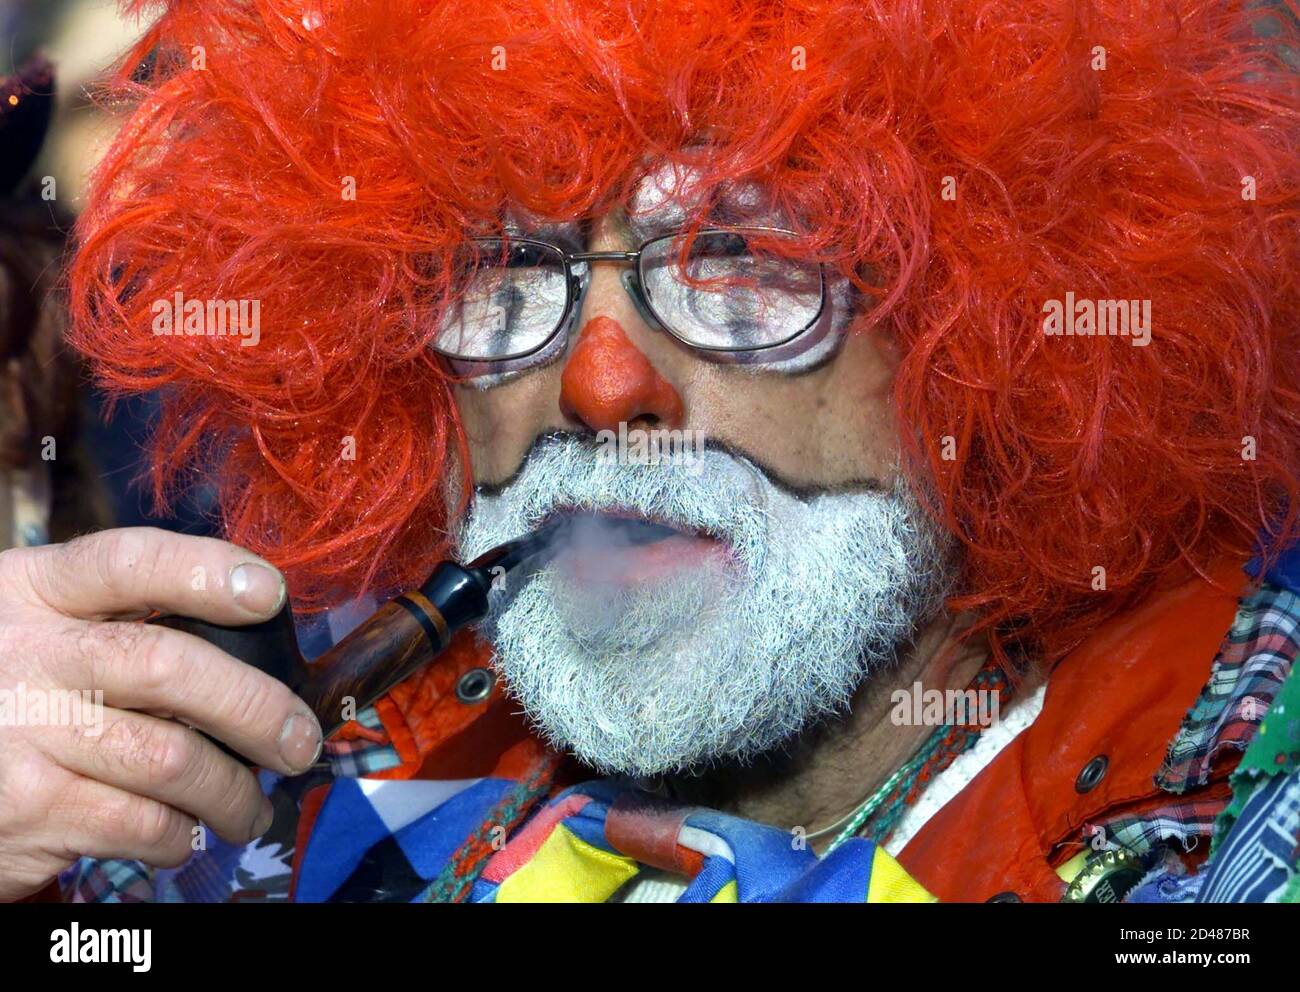 An inhabitant of the western German town of Cologne smokes a pipe dressed as a clown to celebrates the start of the carnival season in Cologne November 11, 2000. The highlight of this season will be the Rose Monday Parade in February 2001.  JS/CRB Stock Photo